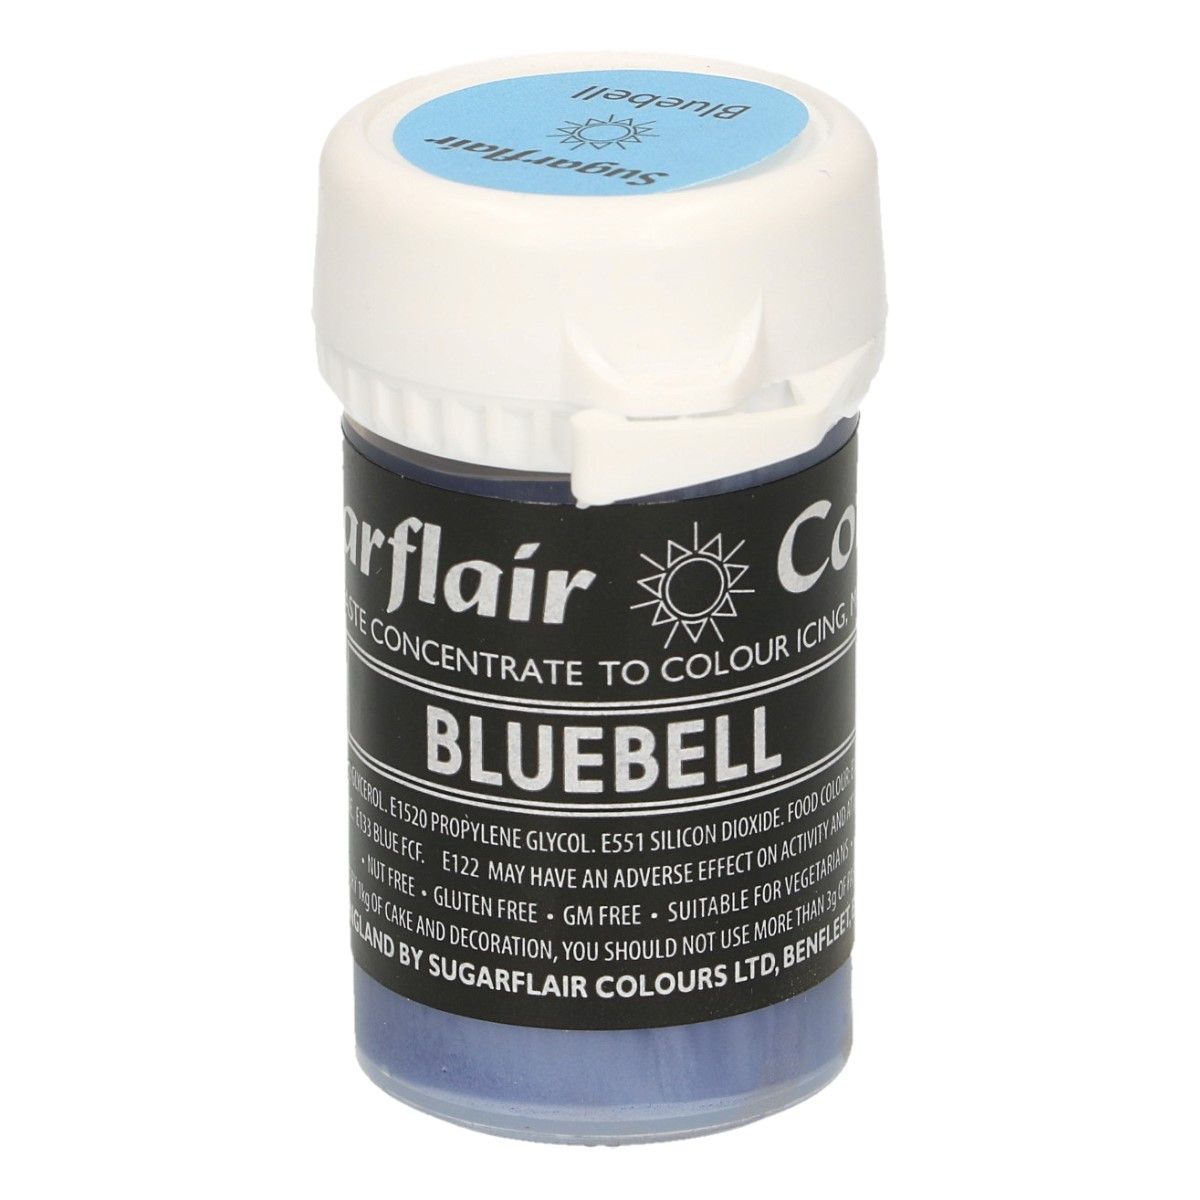 Sugarflair Pastel Colour Bluebell 25g